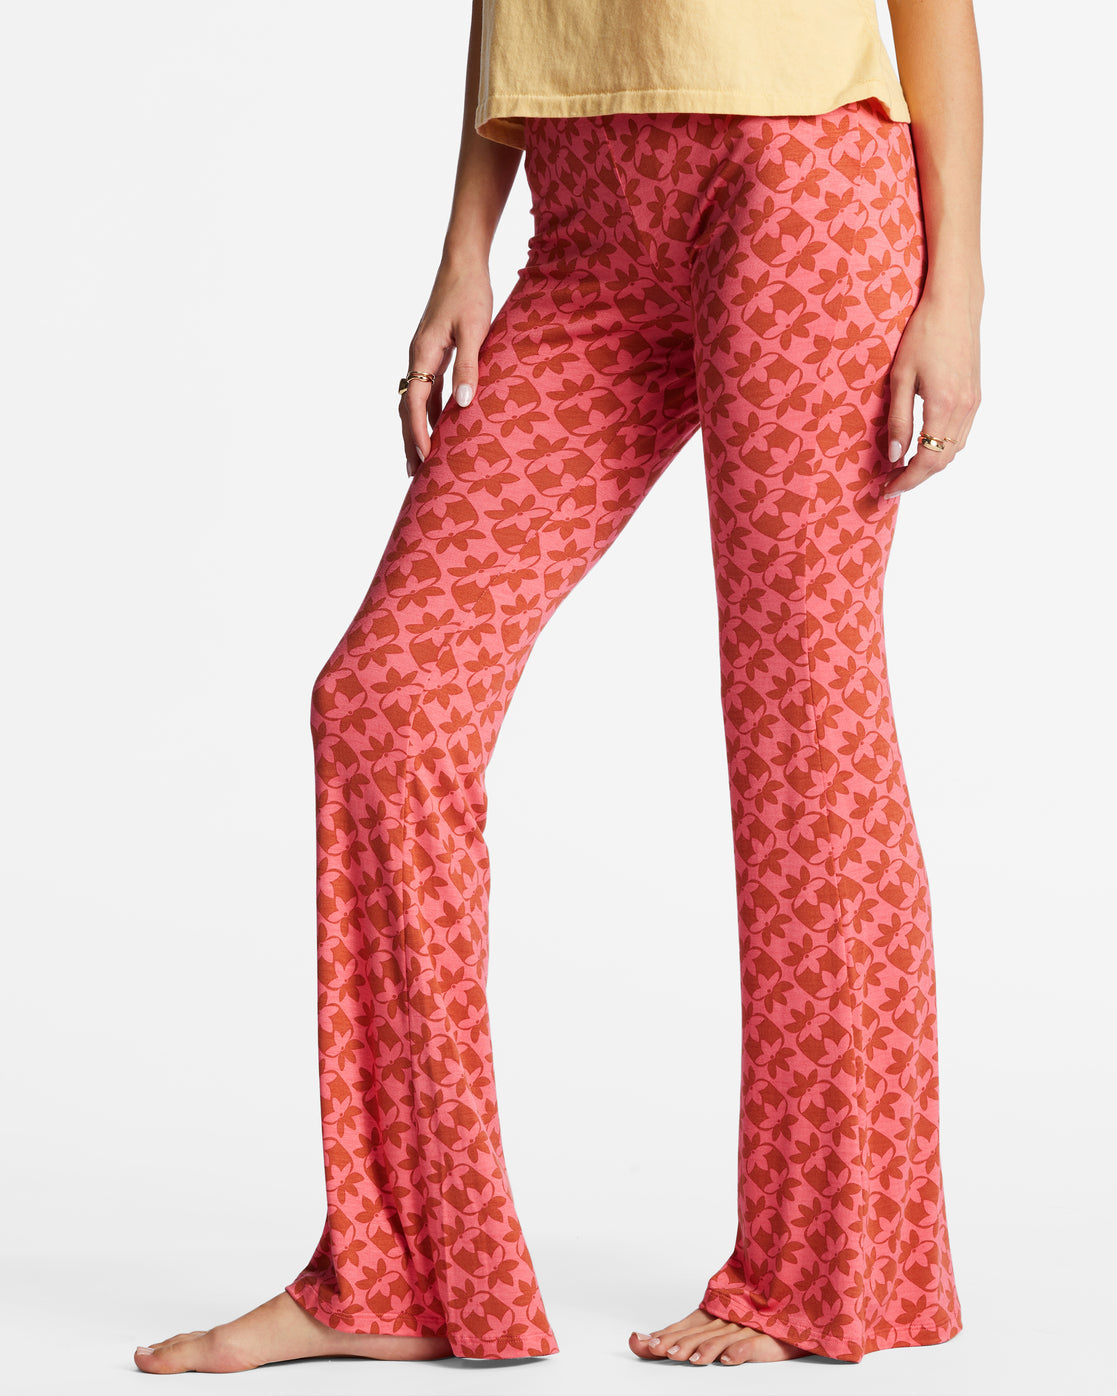 Vintage Printed Flared Pants Women Stretchy Flared Pants High